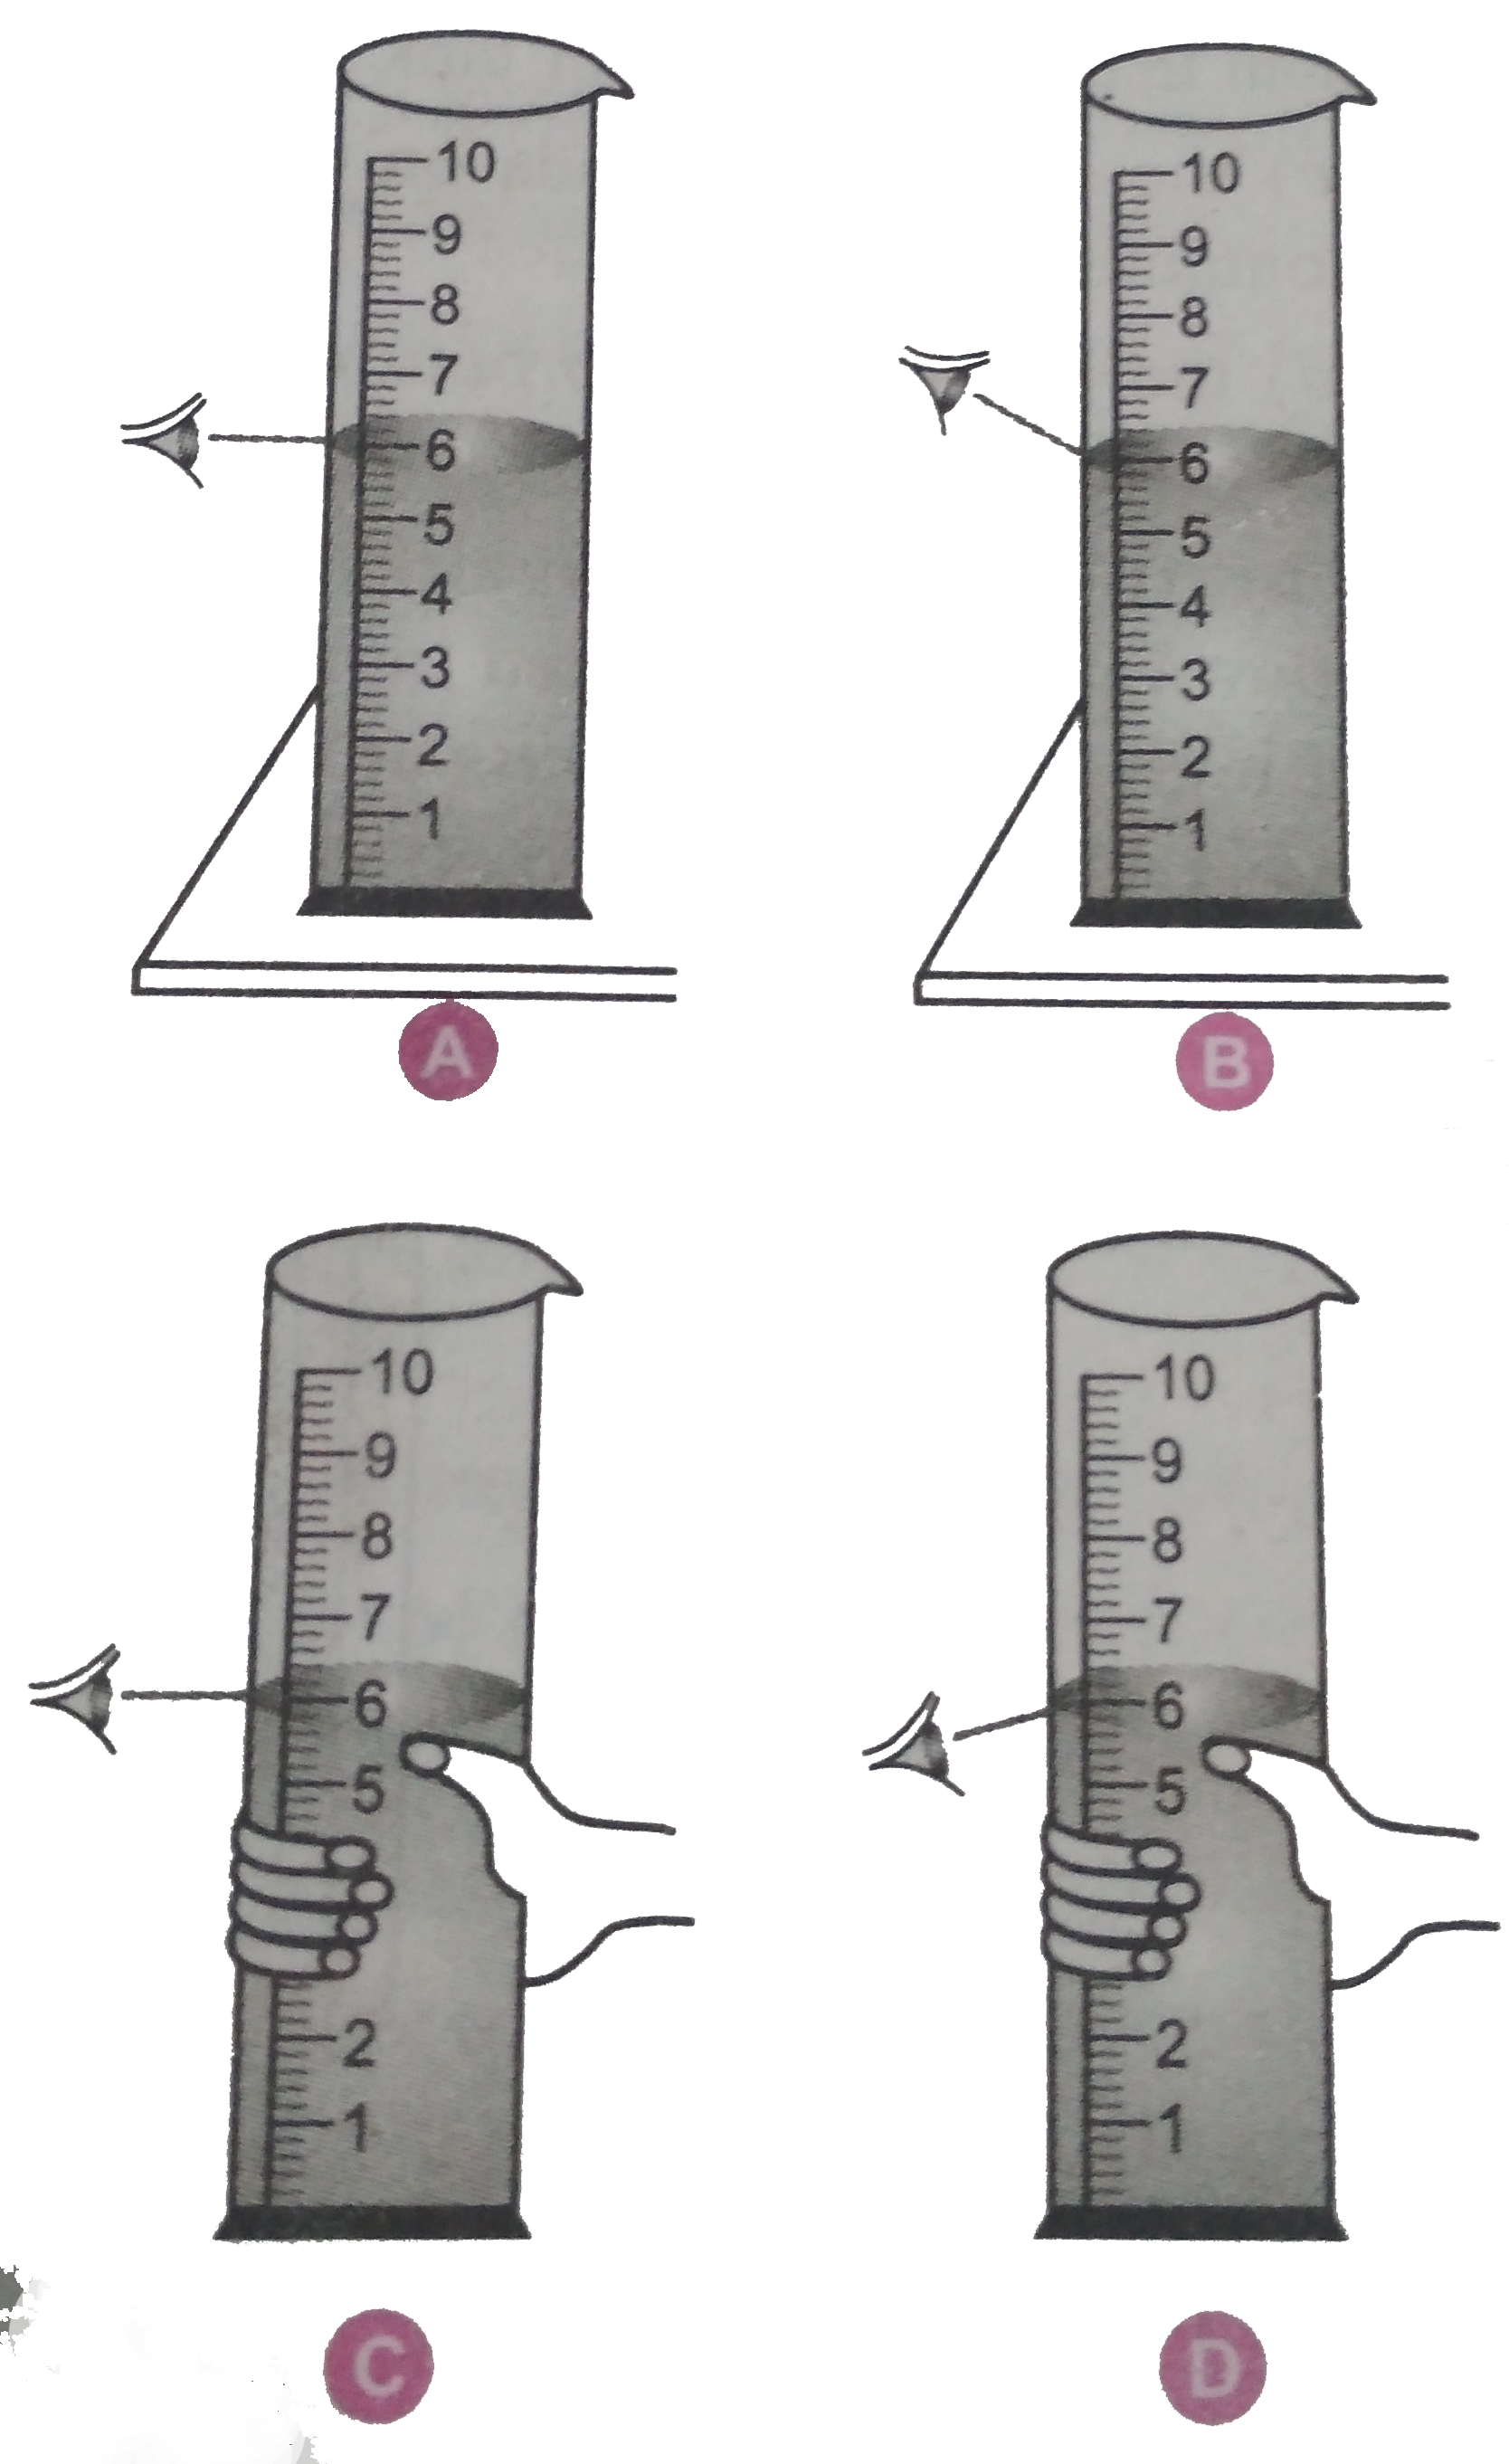 Which is the correct way of reading the liquid level in a measuring cylinder